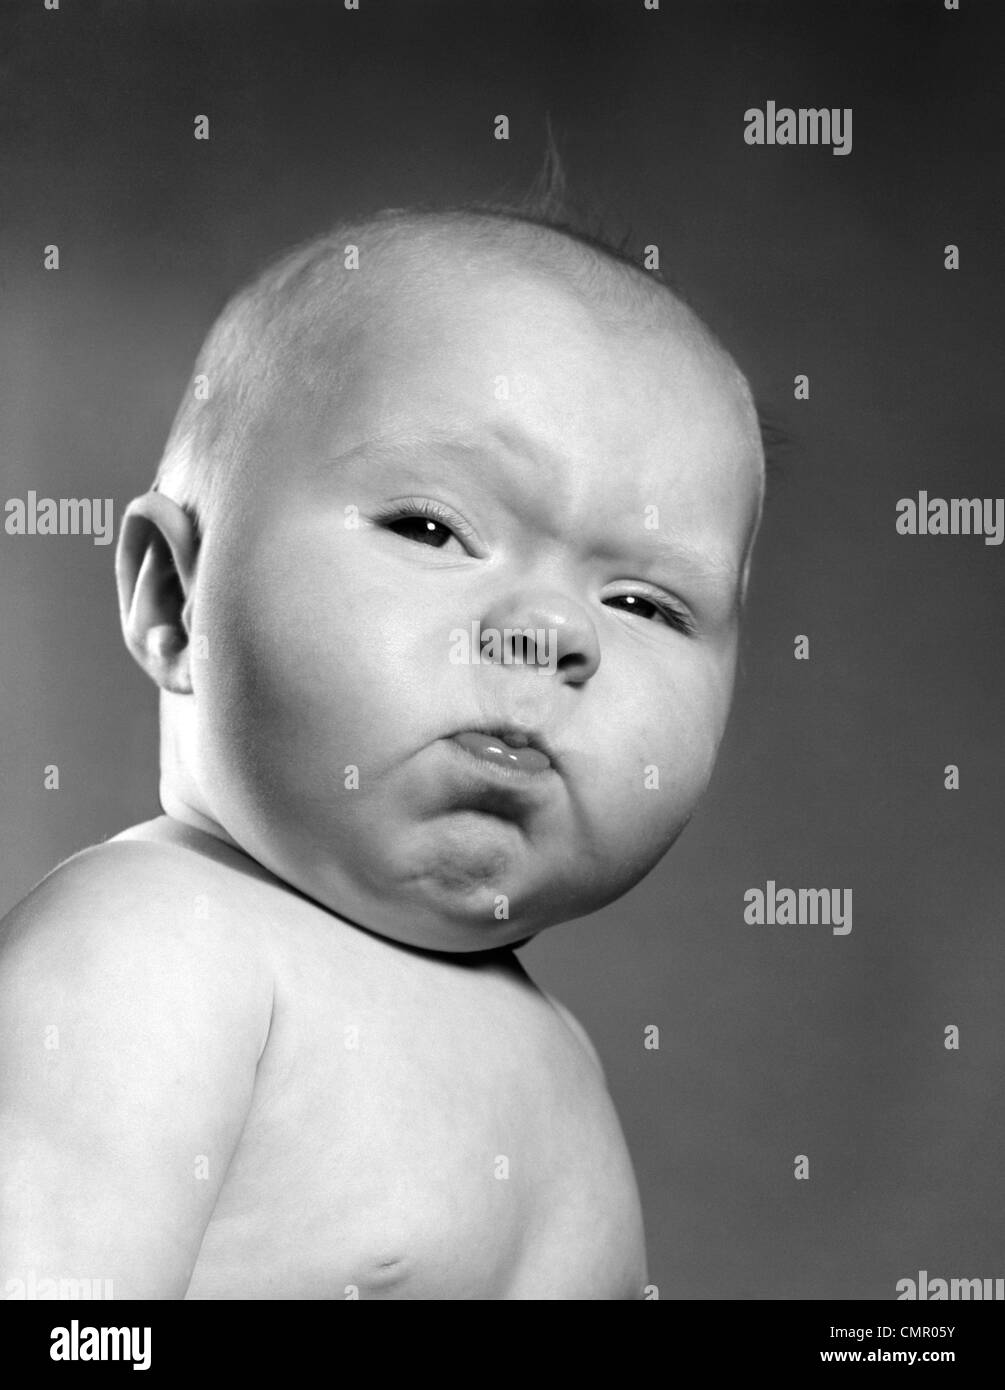 1950s HEAD SHOT OF BABY WITH FUNNY PUCKERED MOUTH FACIAL EXPRESSION Stock Photo